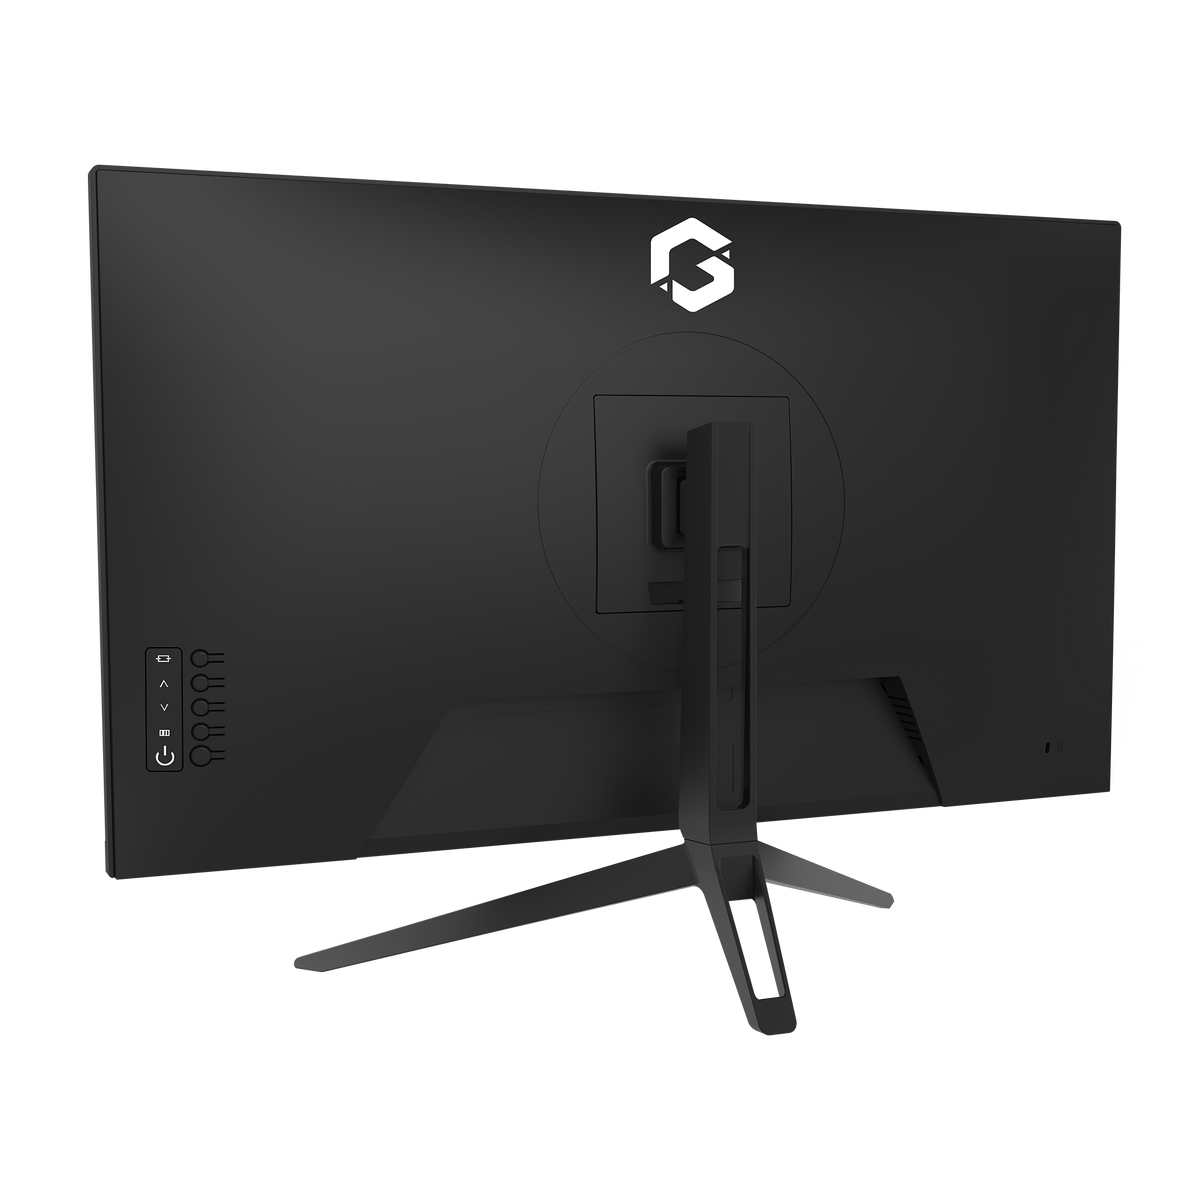 144hz Monitor For Ps5 Games Screen 1080P